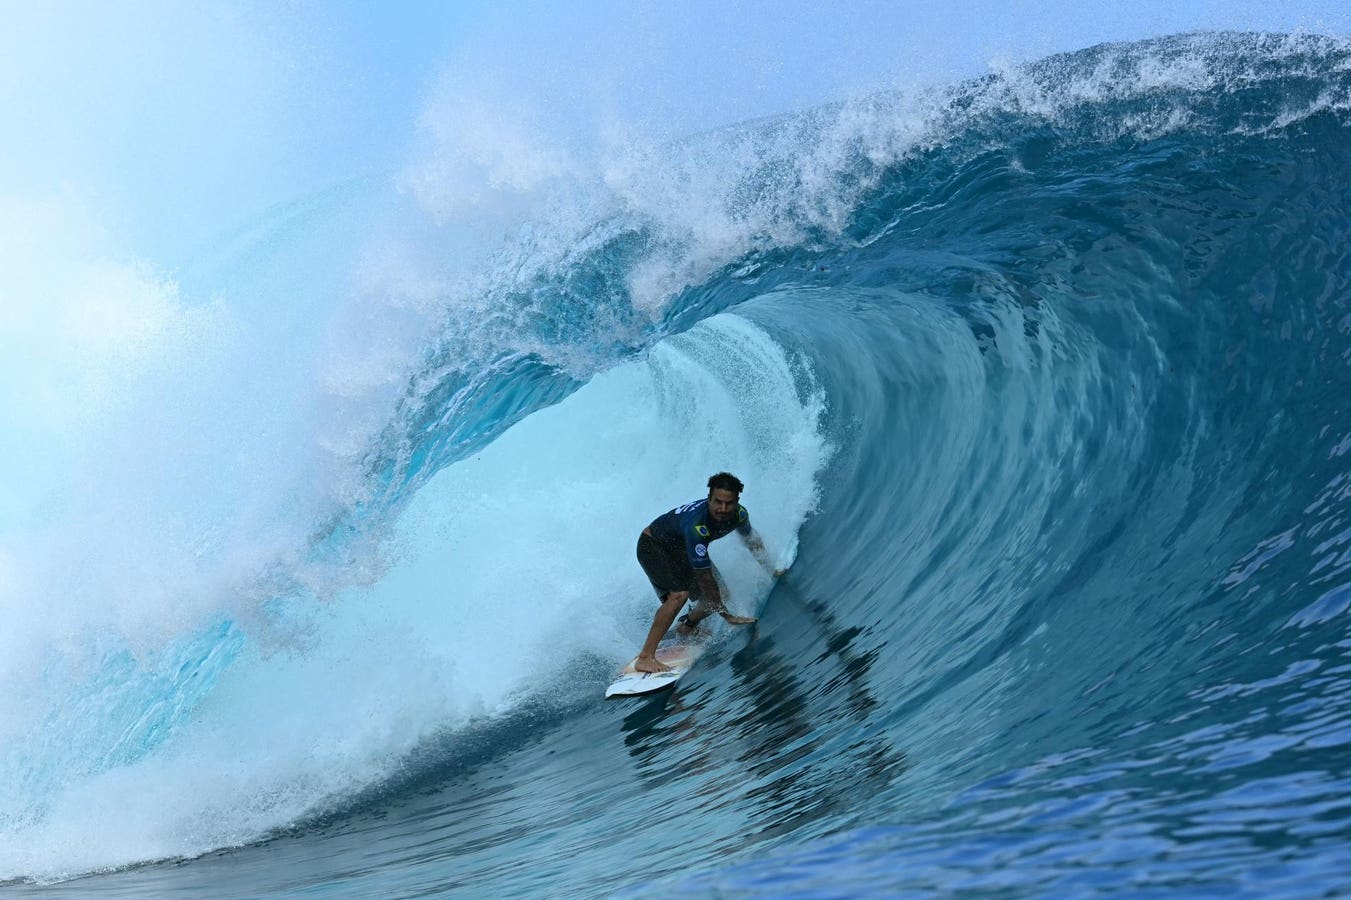 What To Expect For 2024 Summer Olympic Surfing In Tahiti